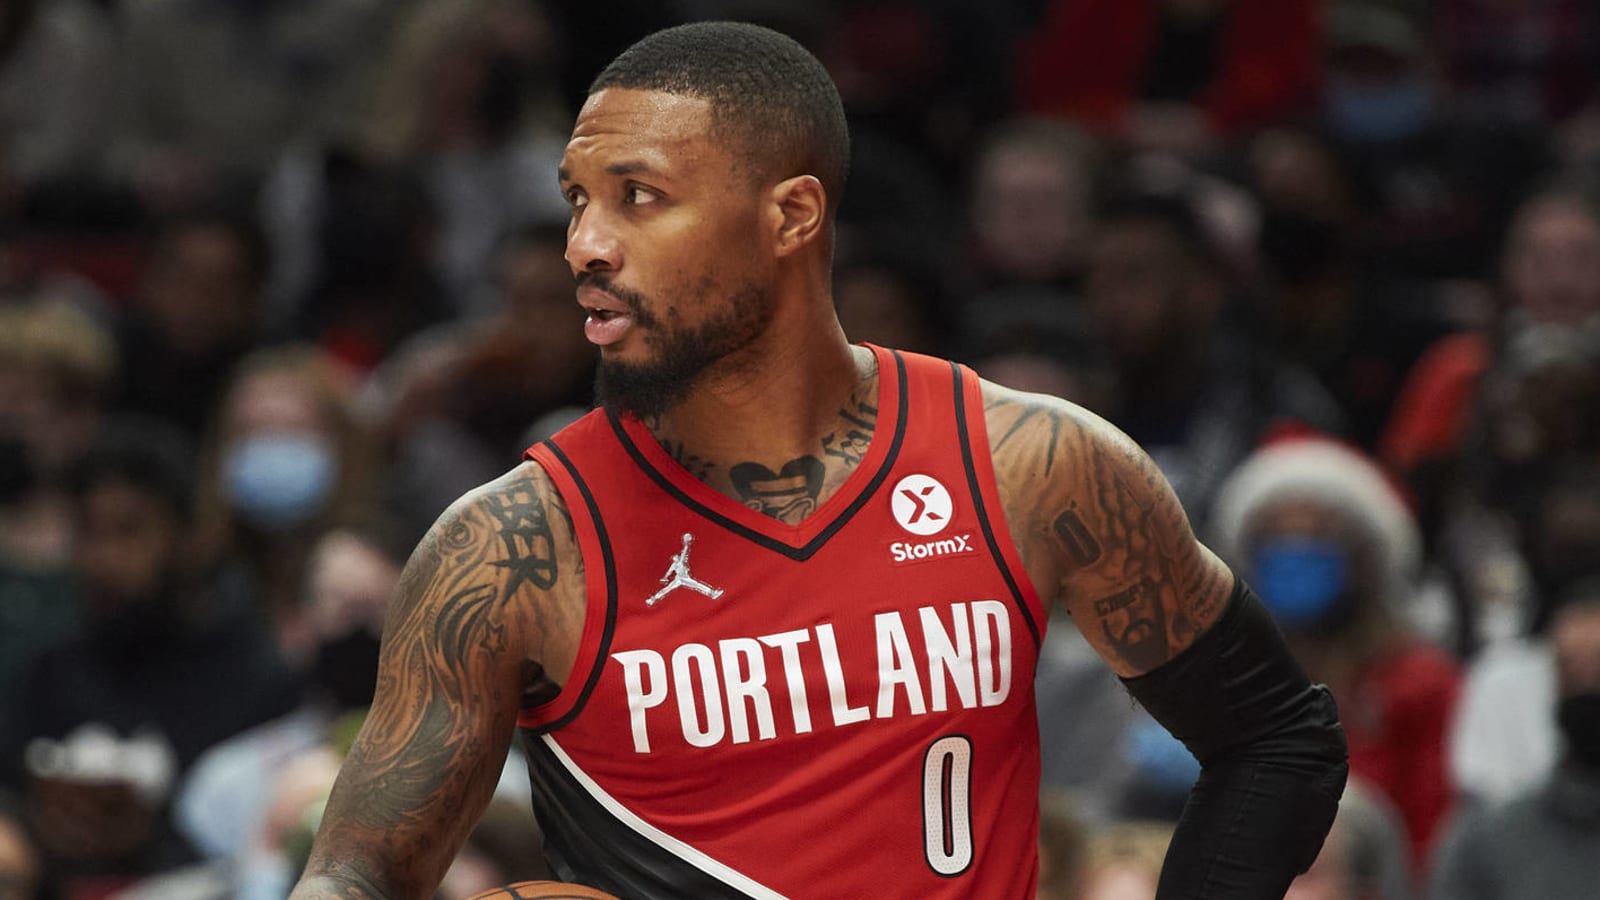 Lillard to have surgery on ab injury, out at least 6-8 weeks